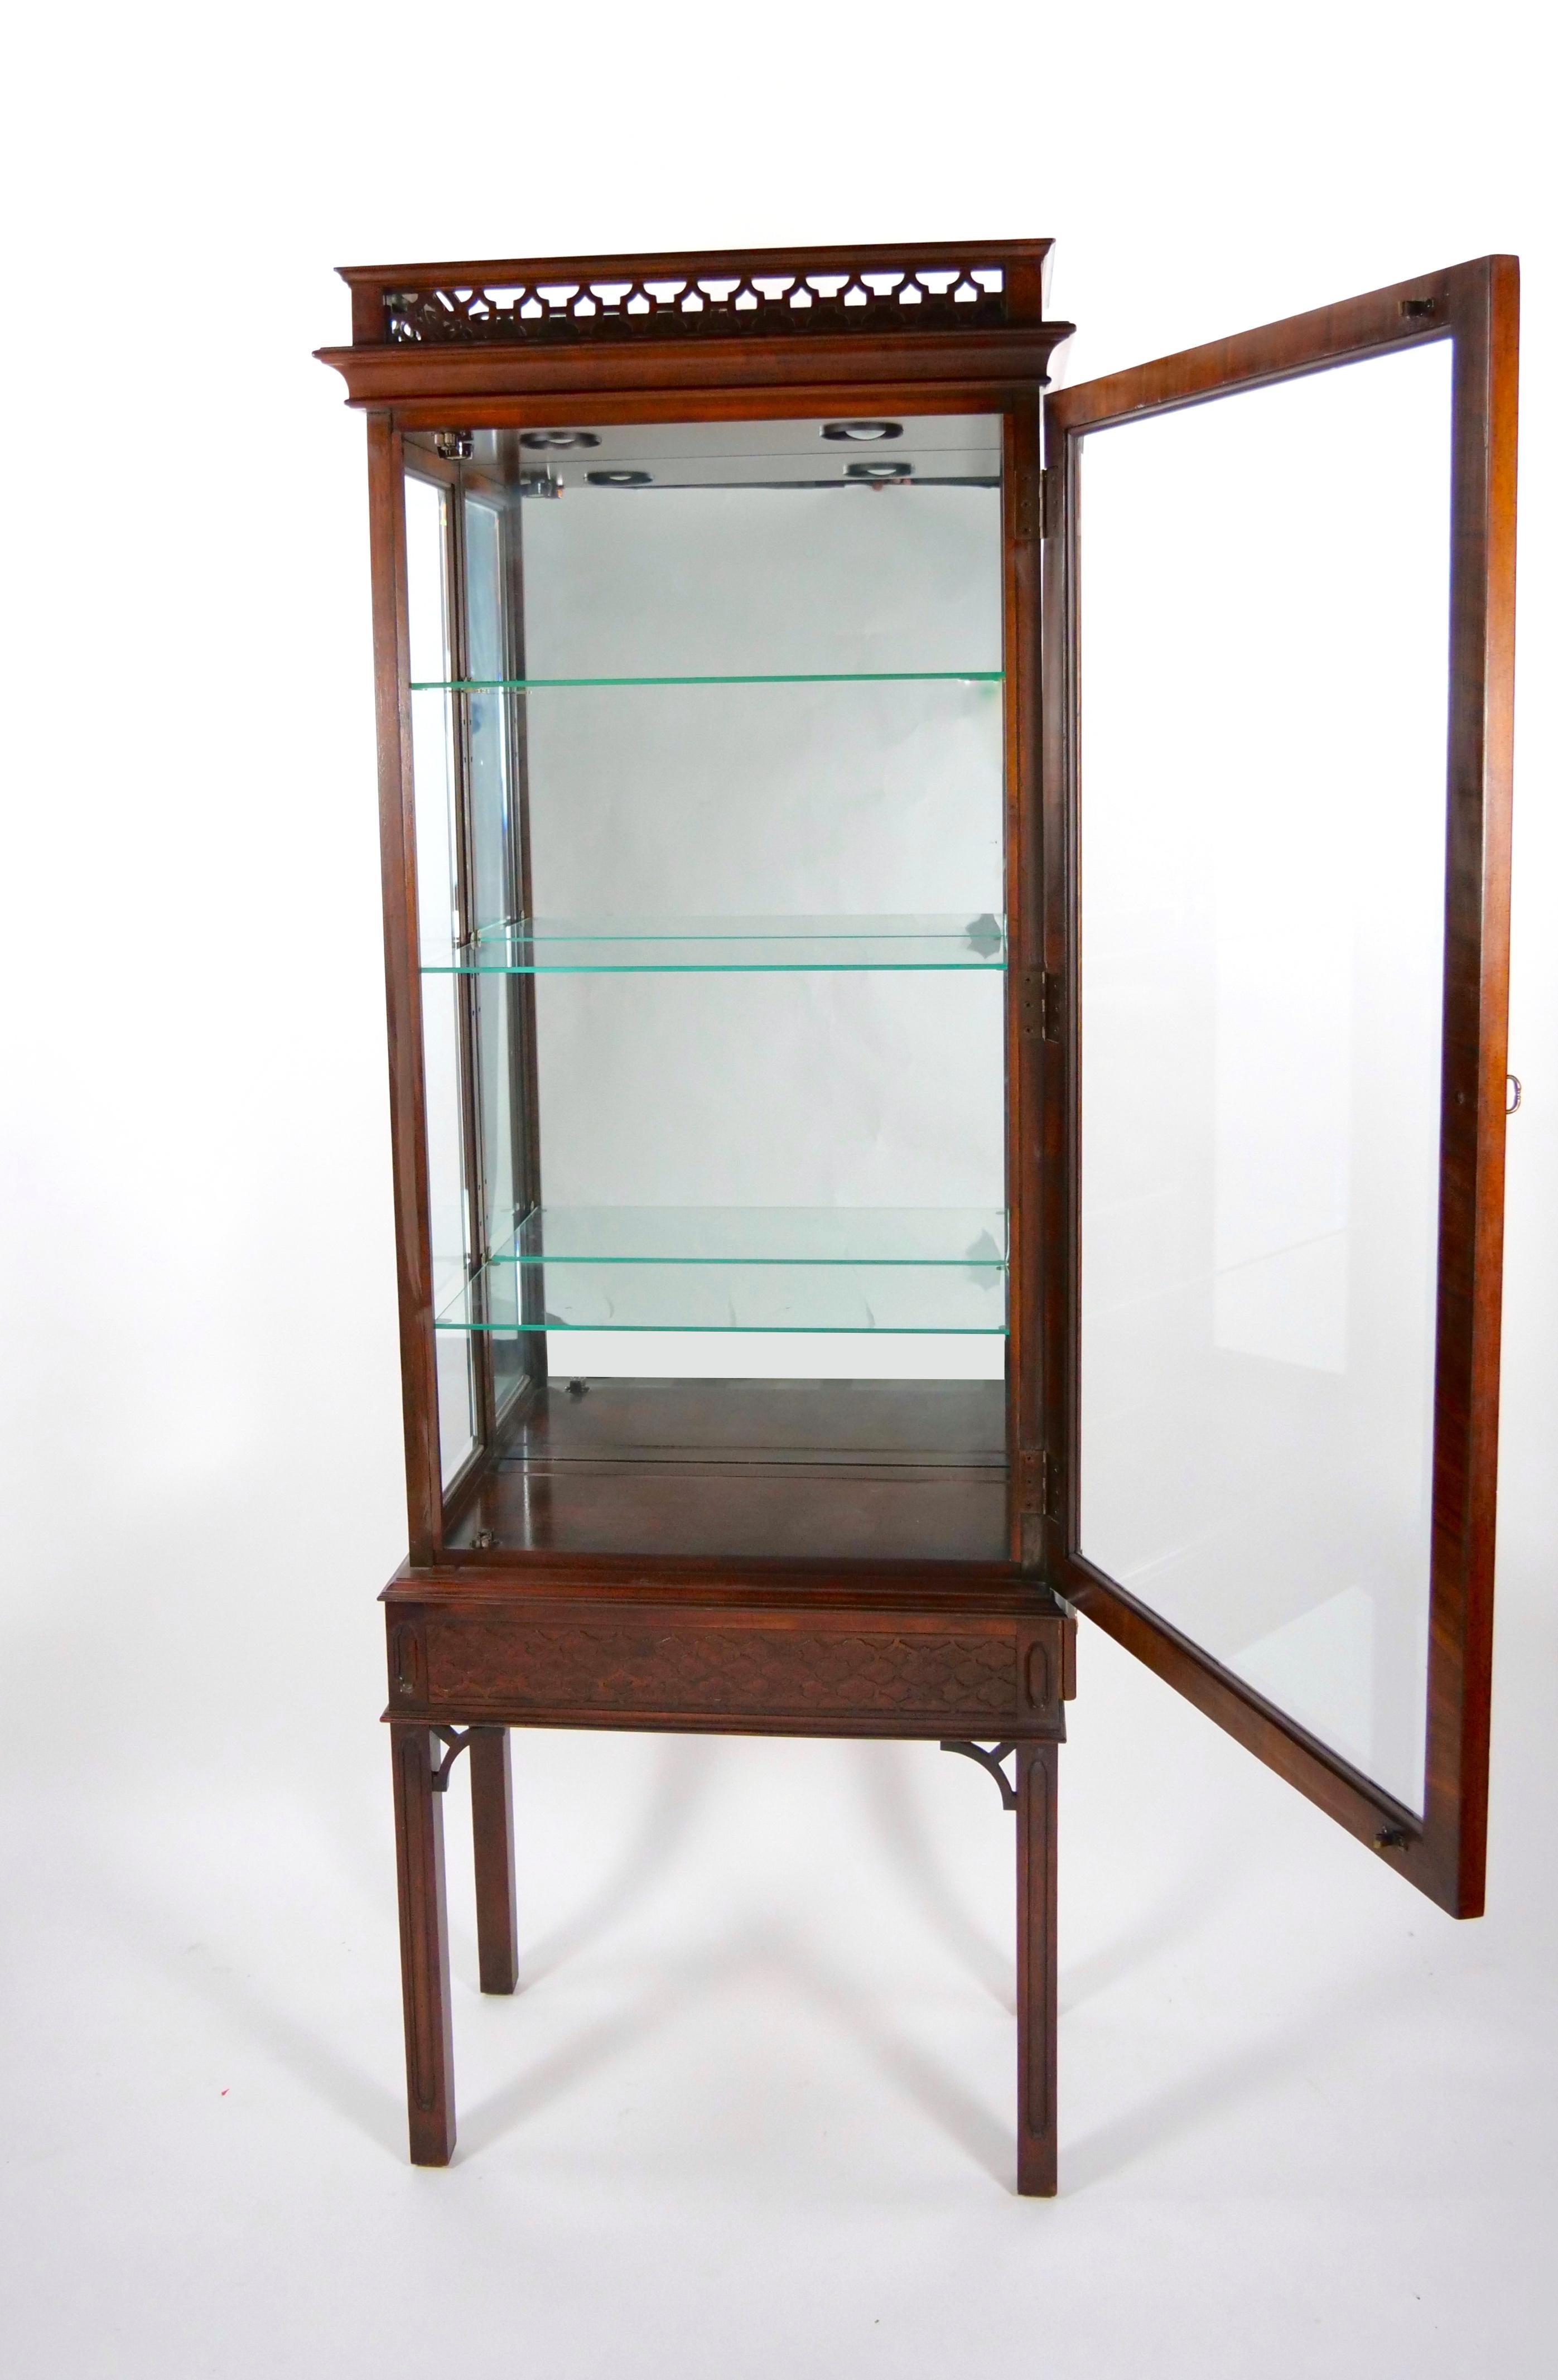 Elevate your living space with this Early 20th Century North American Mahogany Wood Framed Mirrored Vitrine, a piece of furniture that exudes elegance and timeless charm. The mirrored backsplash creates a sense of depth and luminosity, enhancing the